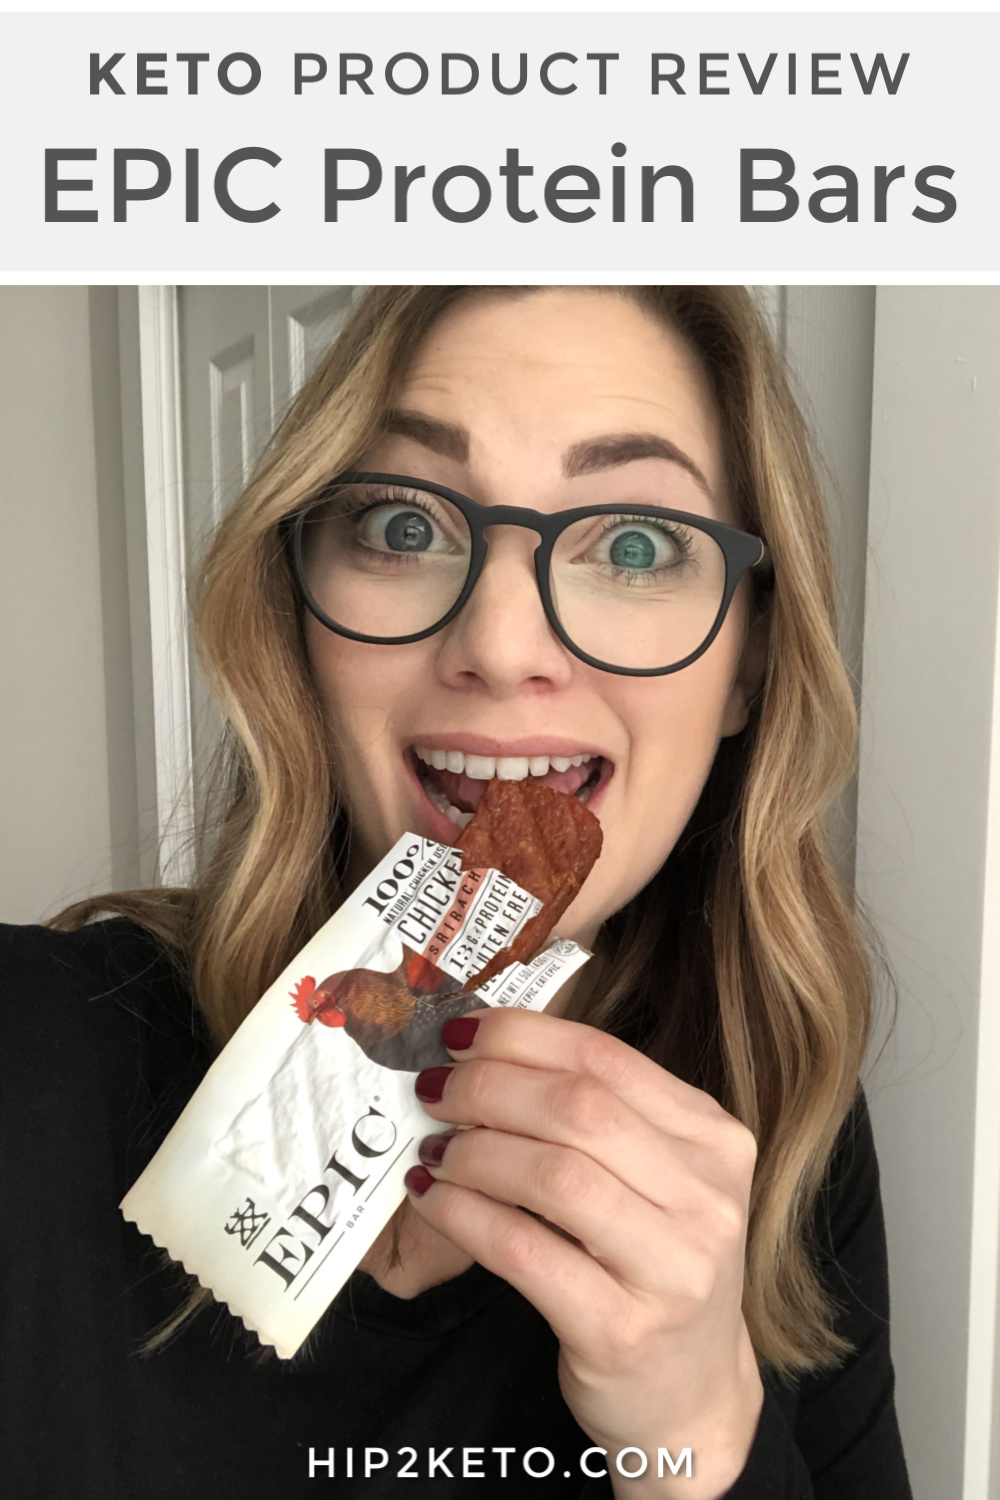 EPIC Protein Bars Review: The Good, The Bad, & The Ugly | Hip2Keto